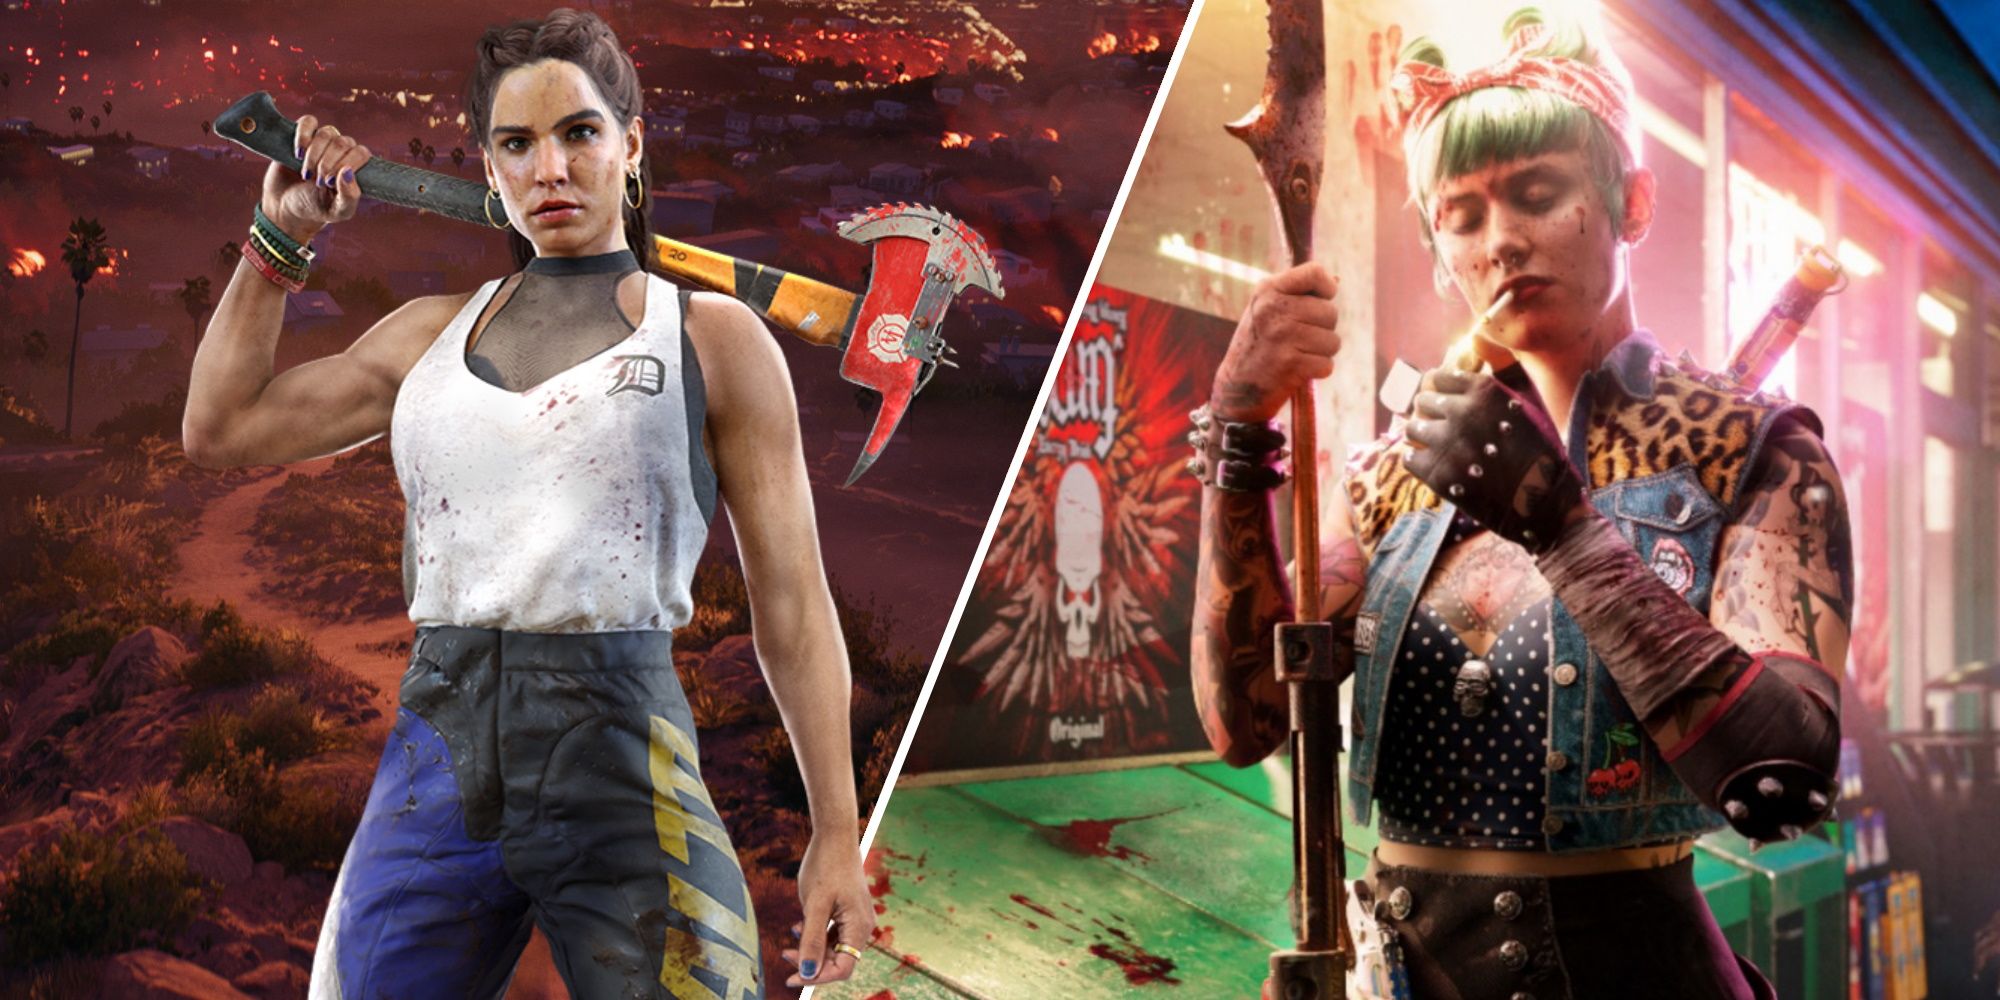 Dead Island 2, Woman on left holding axe weapon, Woman on left holding spear weapon and lighting cigarette